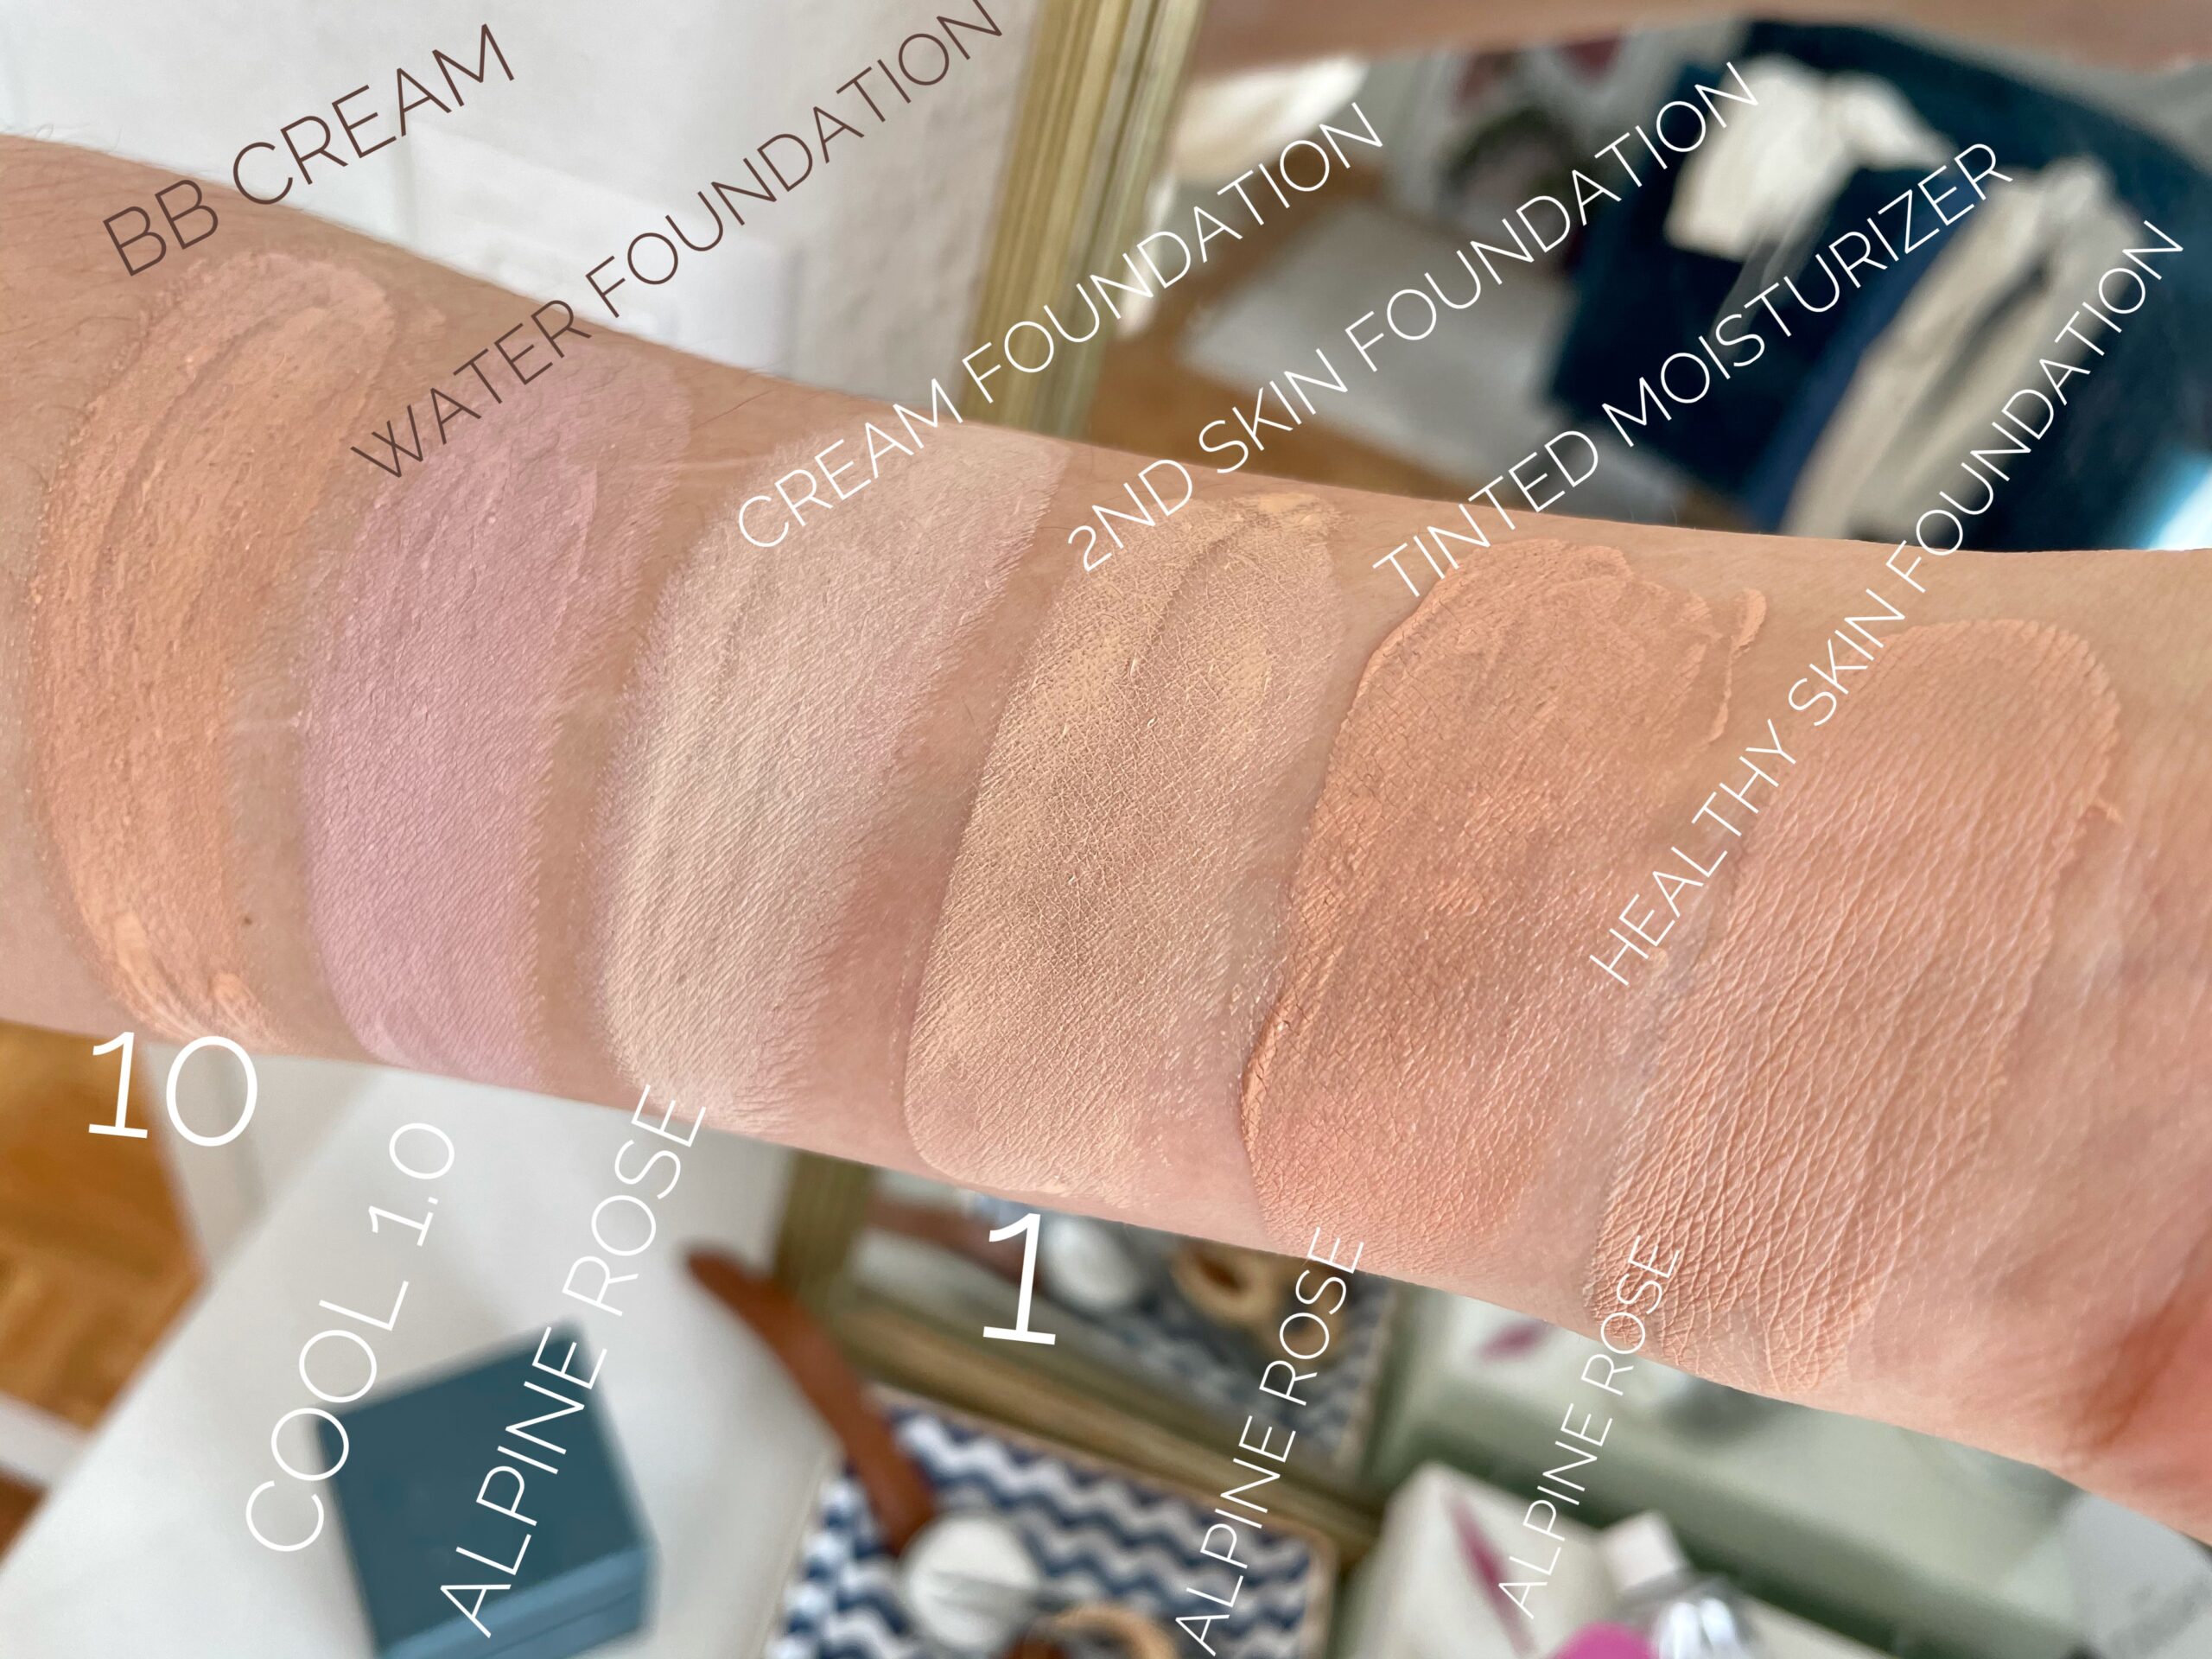 100 Percent Pure Foundation Swatches